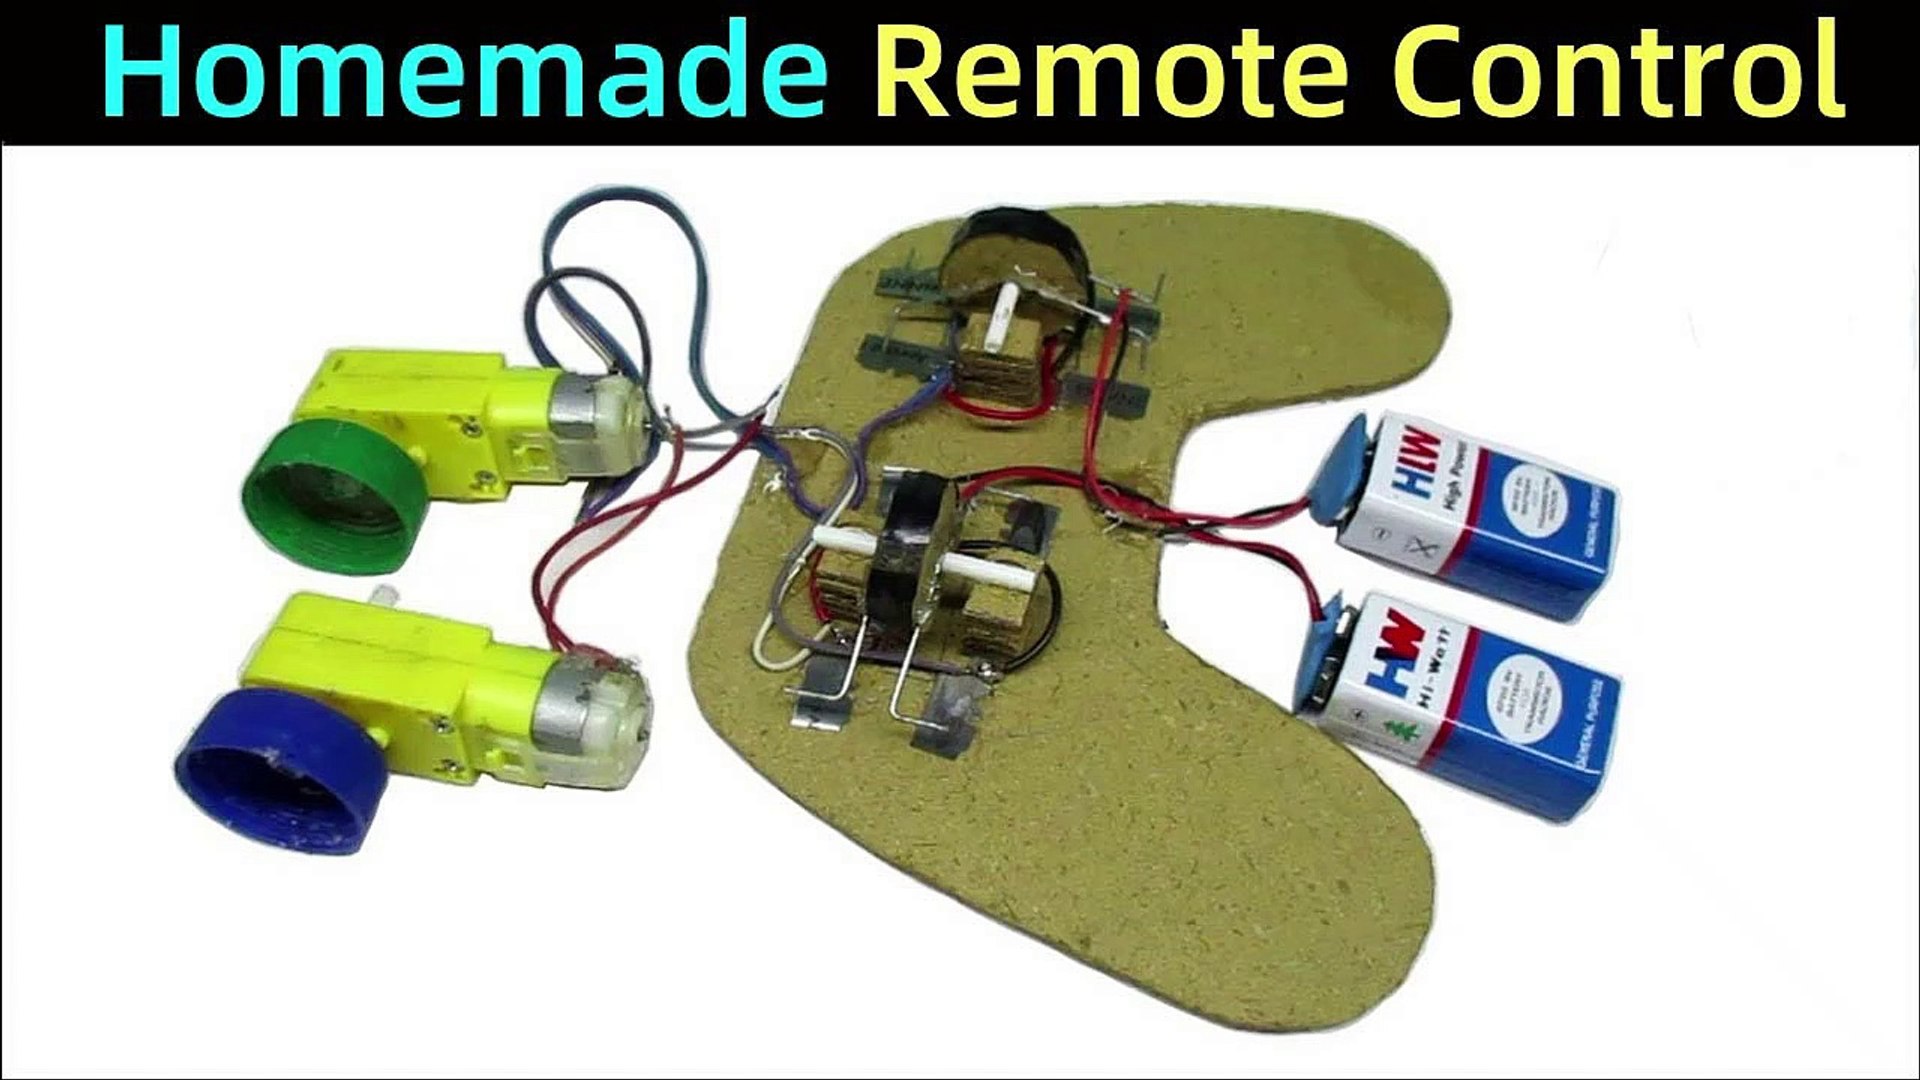 DIY Remote Control with Cardboard | Wired Remote Control System for RC Car  | Homemade Remote Control | How to Make Remote Control for RC Car - video  Dailymotion